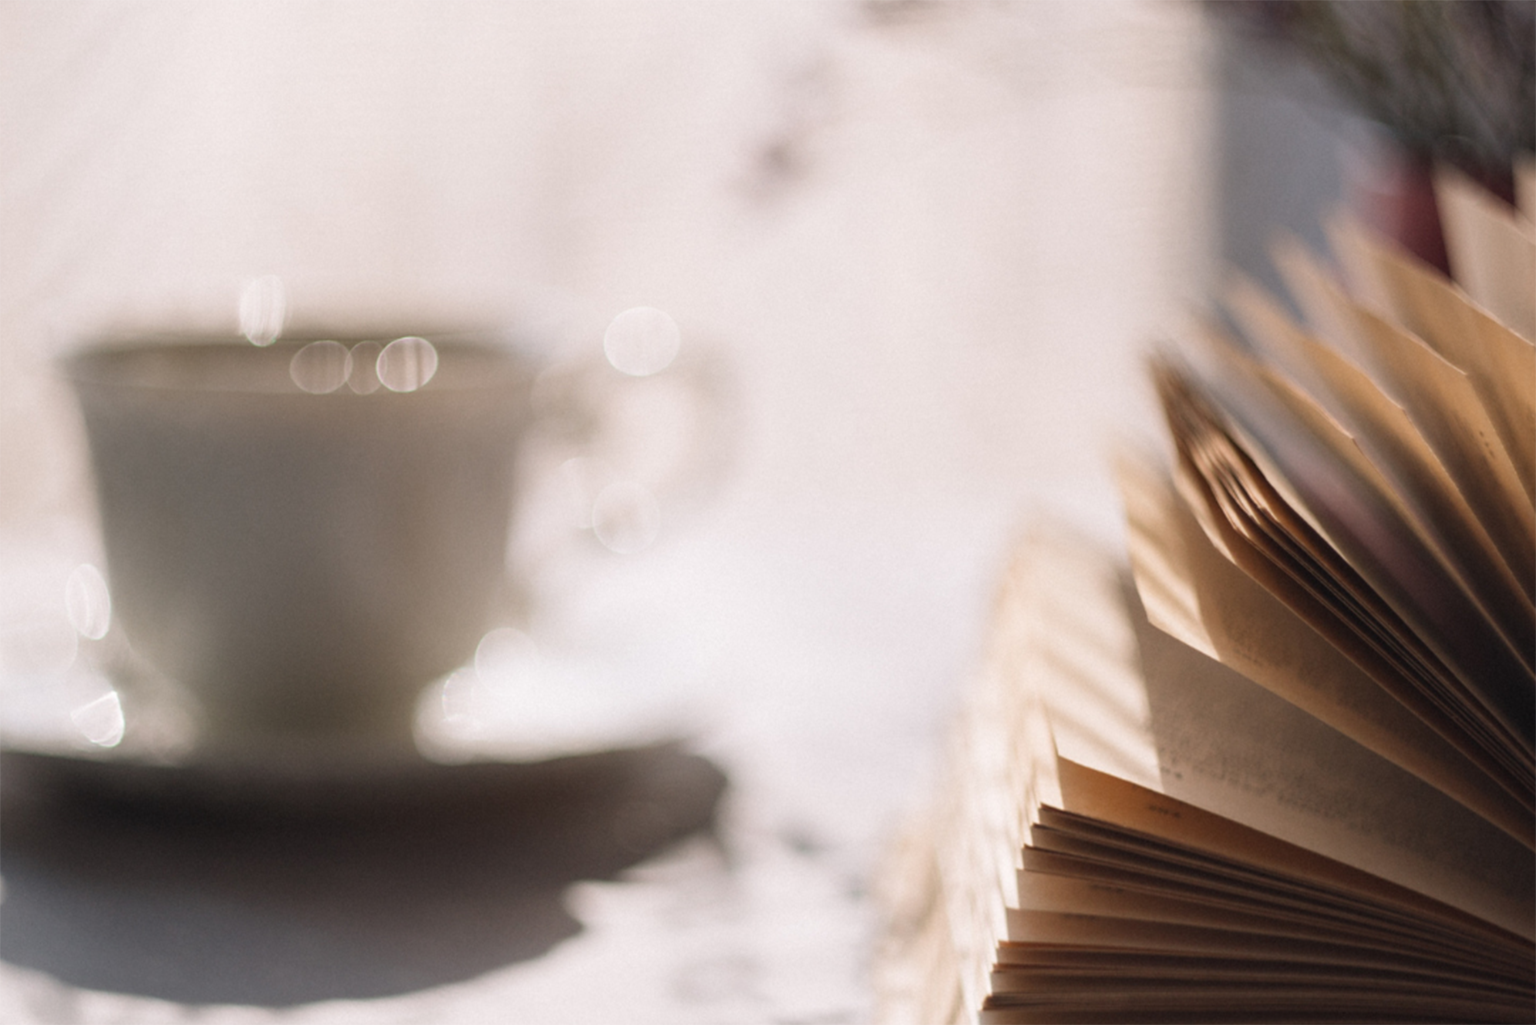 an open book and a cup of coffee on a table.